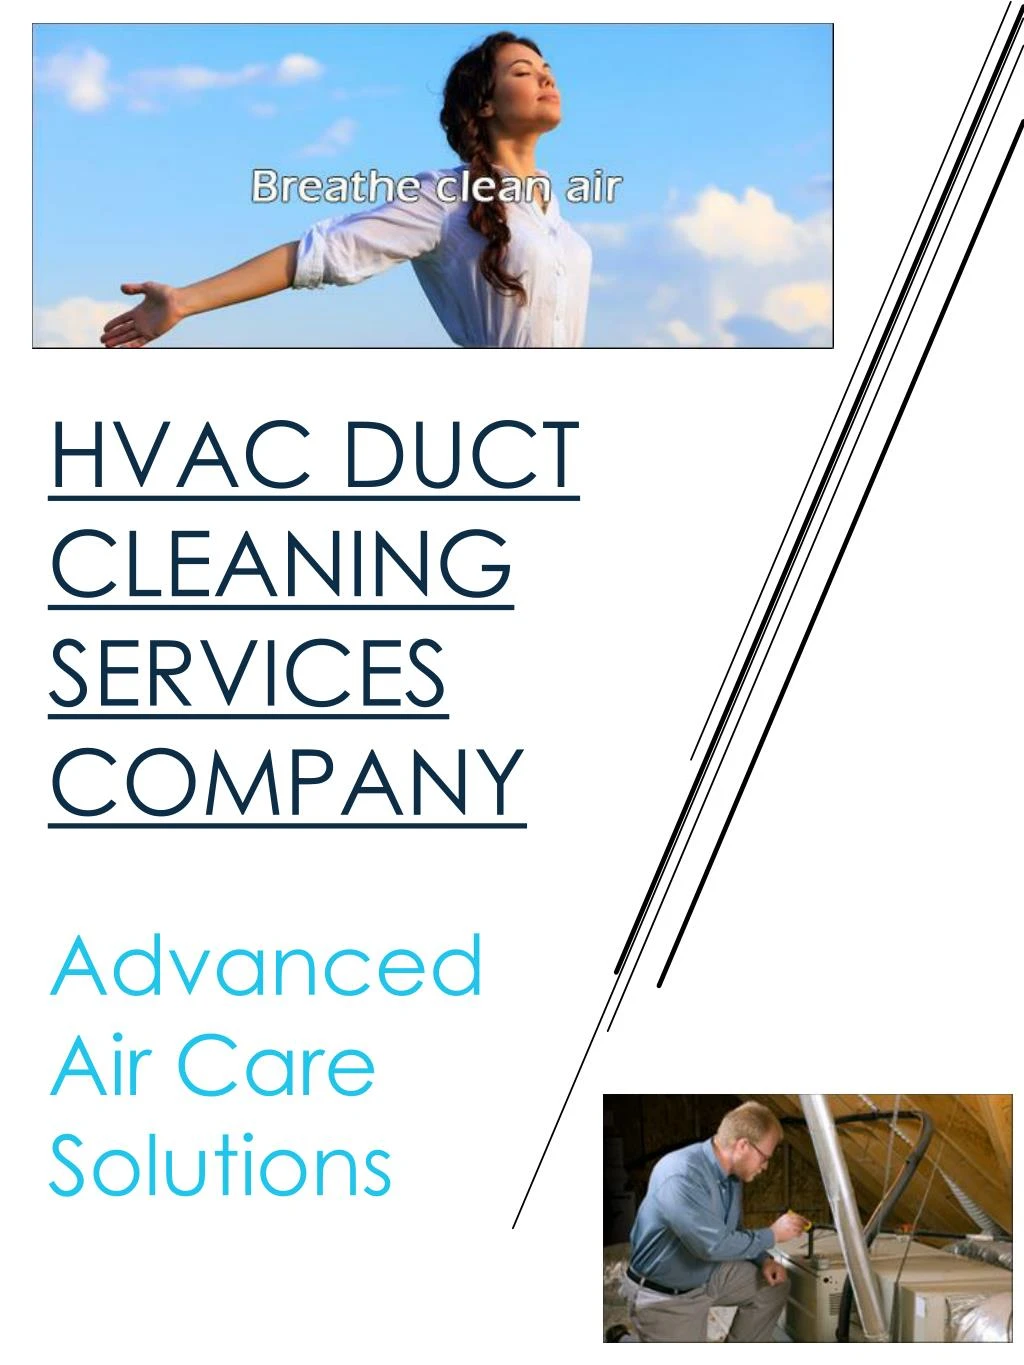 hvac duct cleaning services company